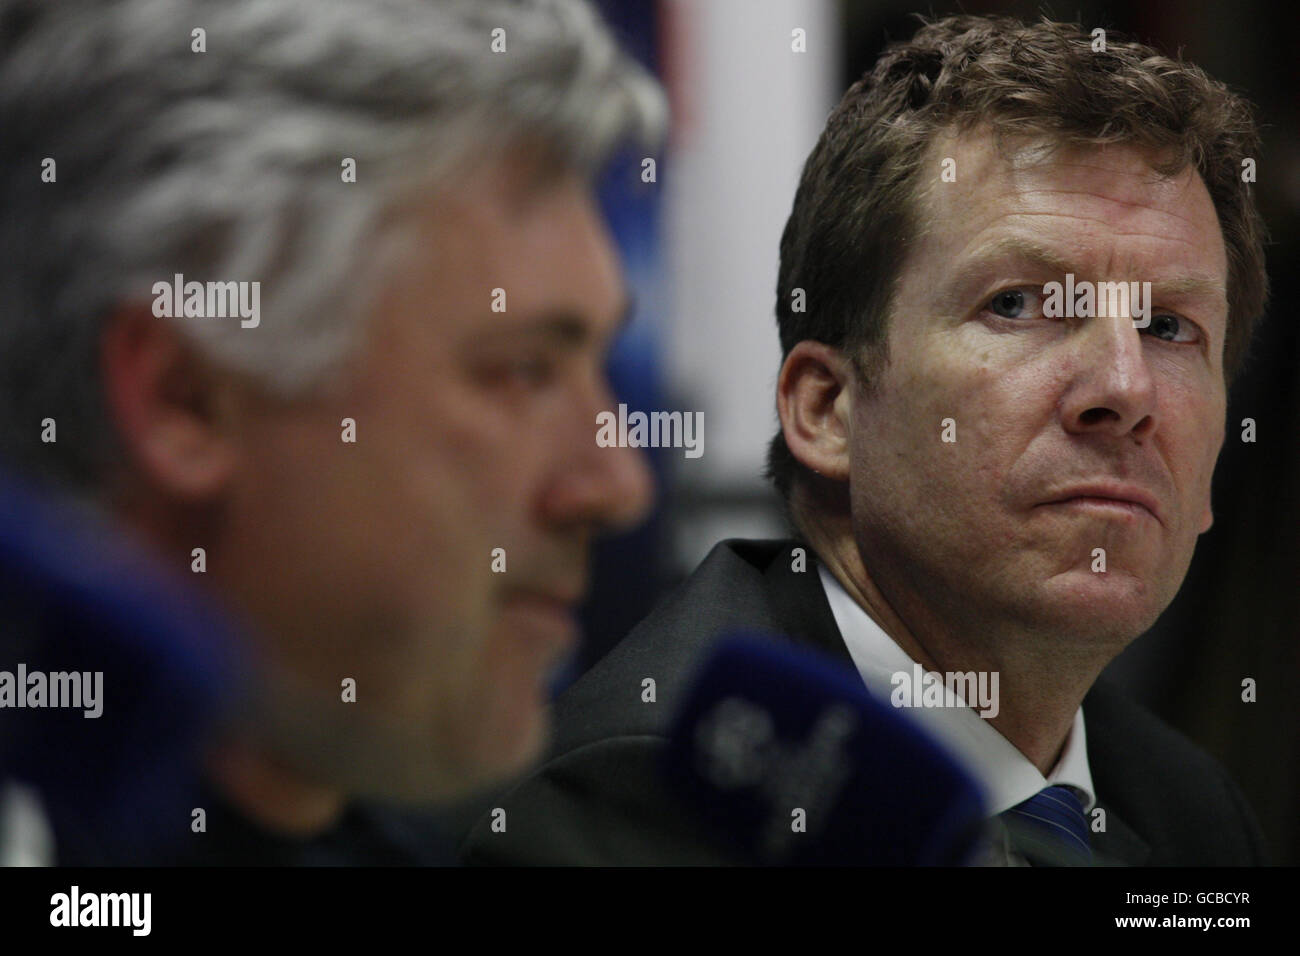 Chelsea head of communications and public affairs Steve Atkins (right) looks on as manager Carlo Ancelotti speaks to the media during the press conference at the San Siro, Milan, Italy. Stock Photo